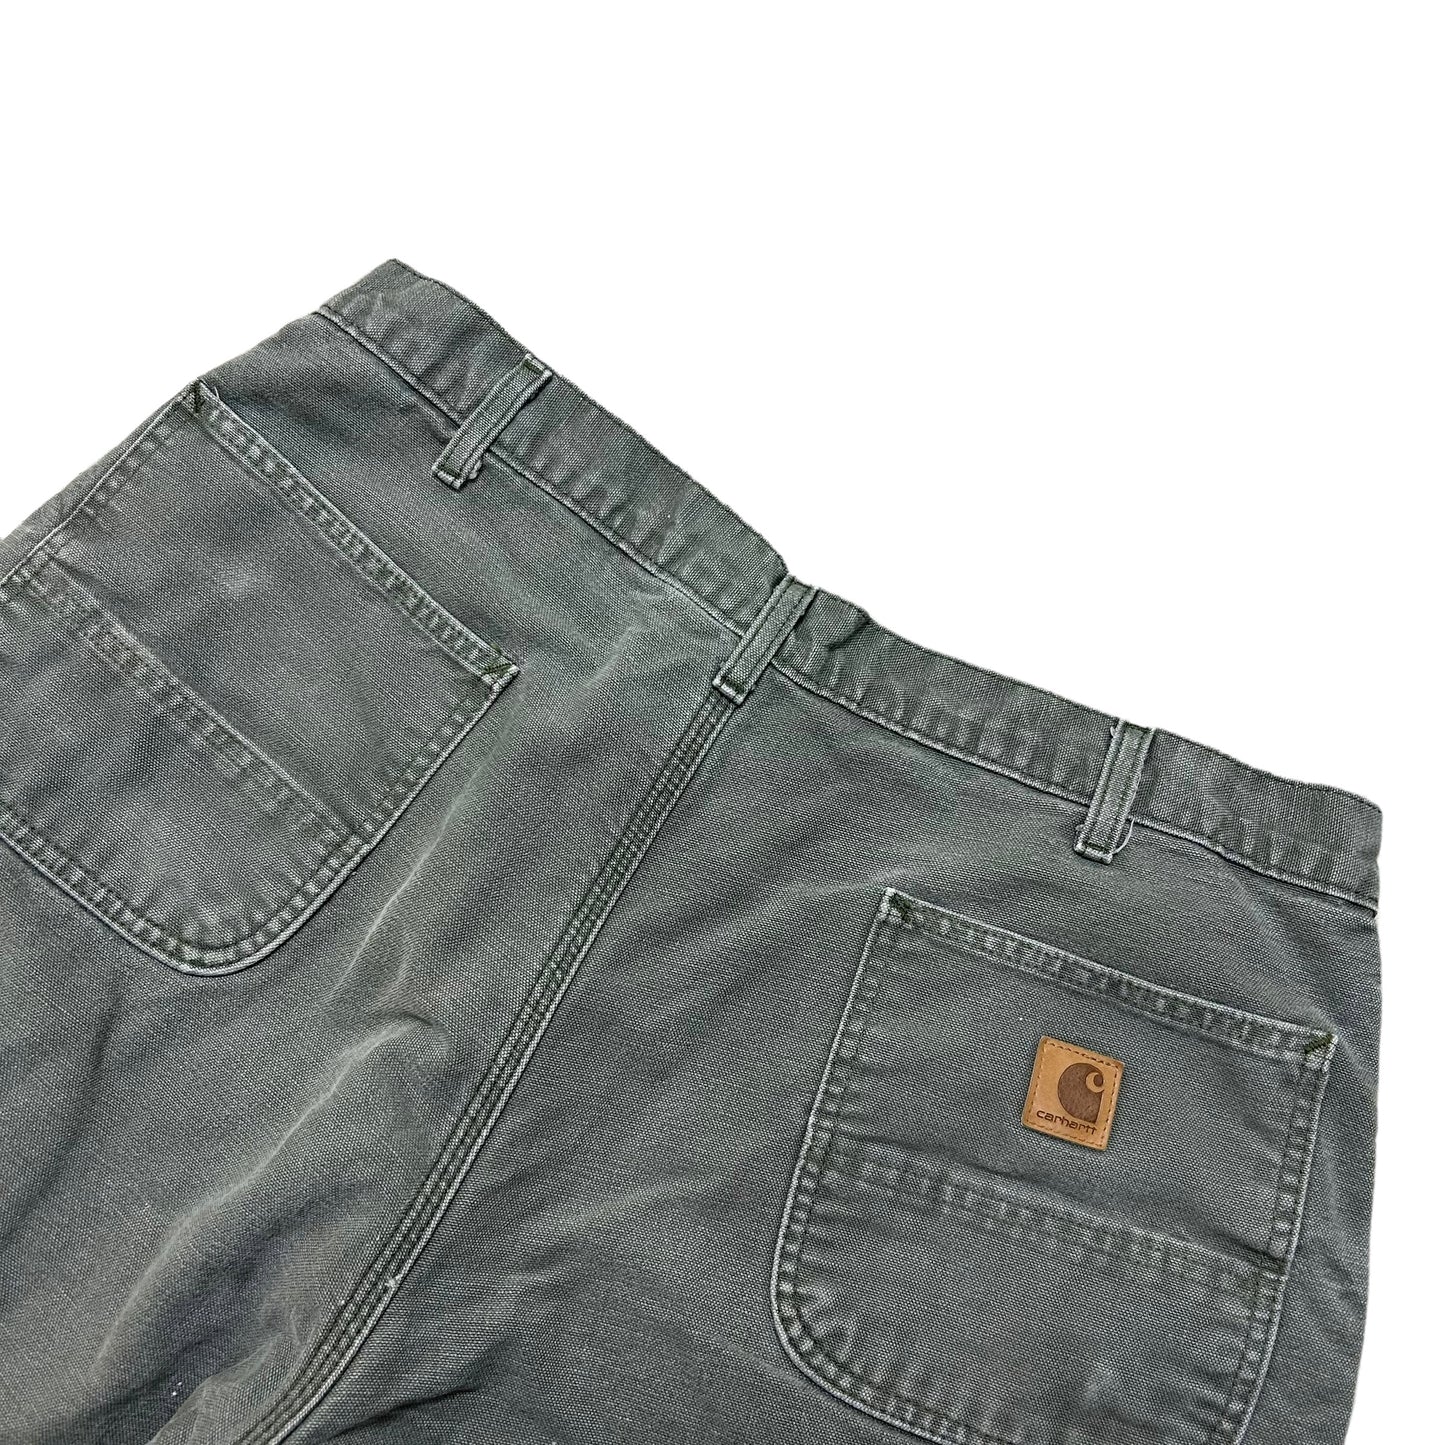 Modern Carhartt Loose Fit Green Flannel Lined Carpenter Pants - Size 38” x 32”